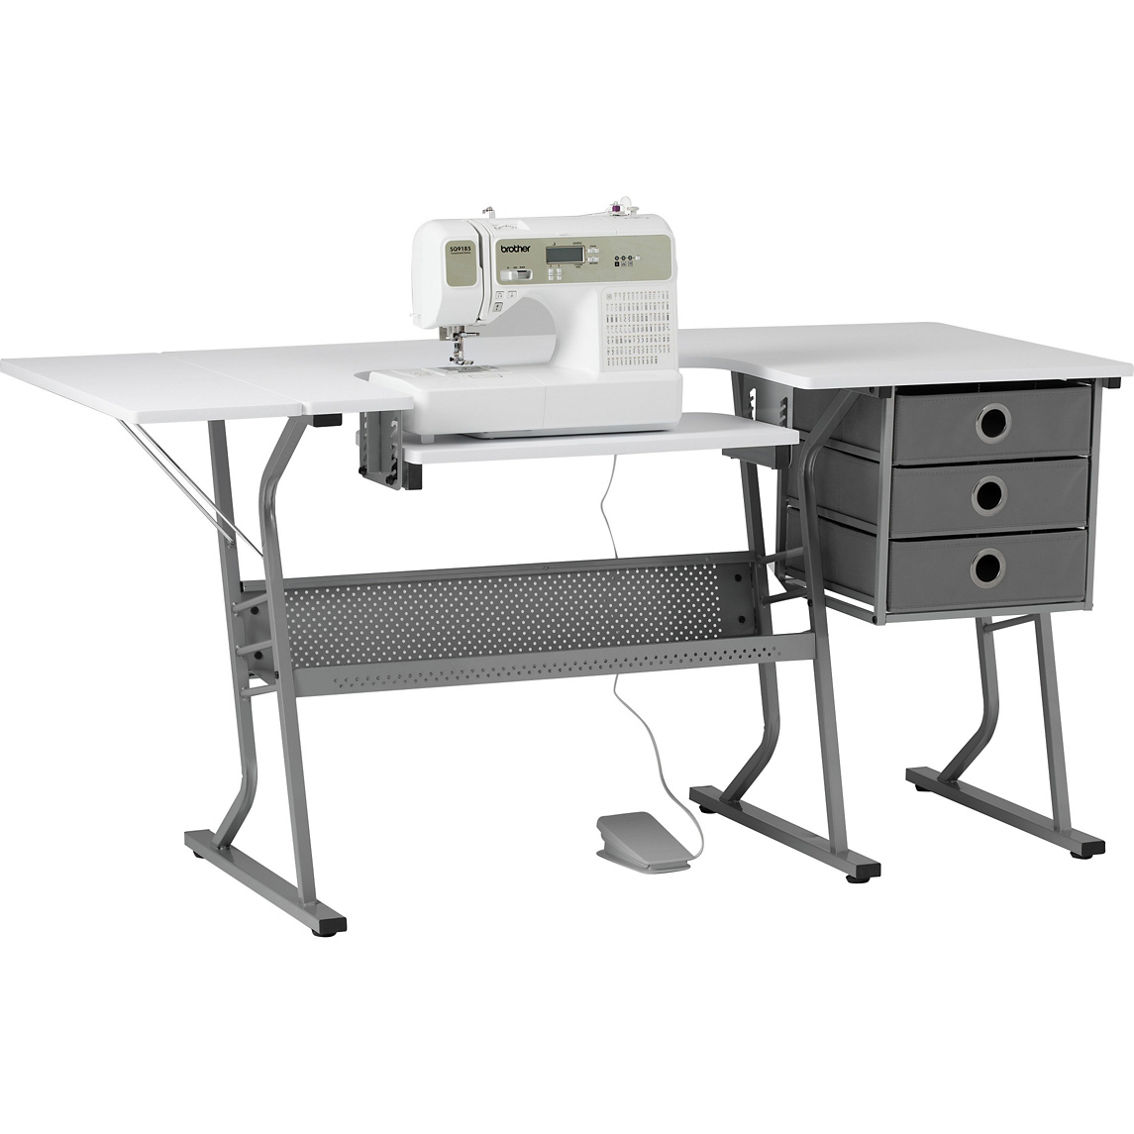 Studio Designs Sew Ready Eclipse Ultra Sewing Table - Image 6 of 8